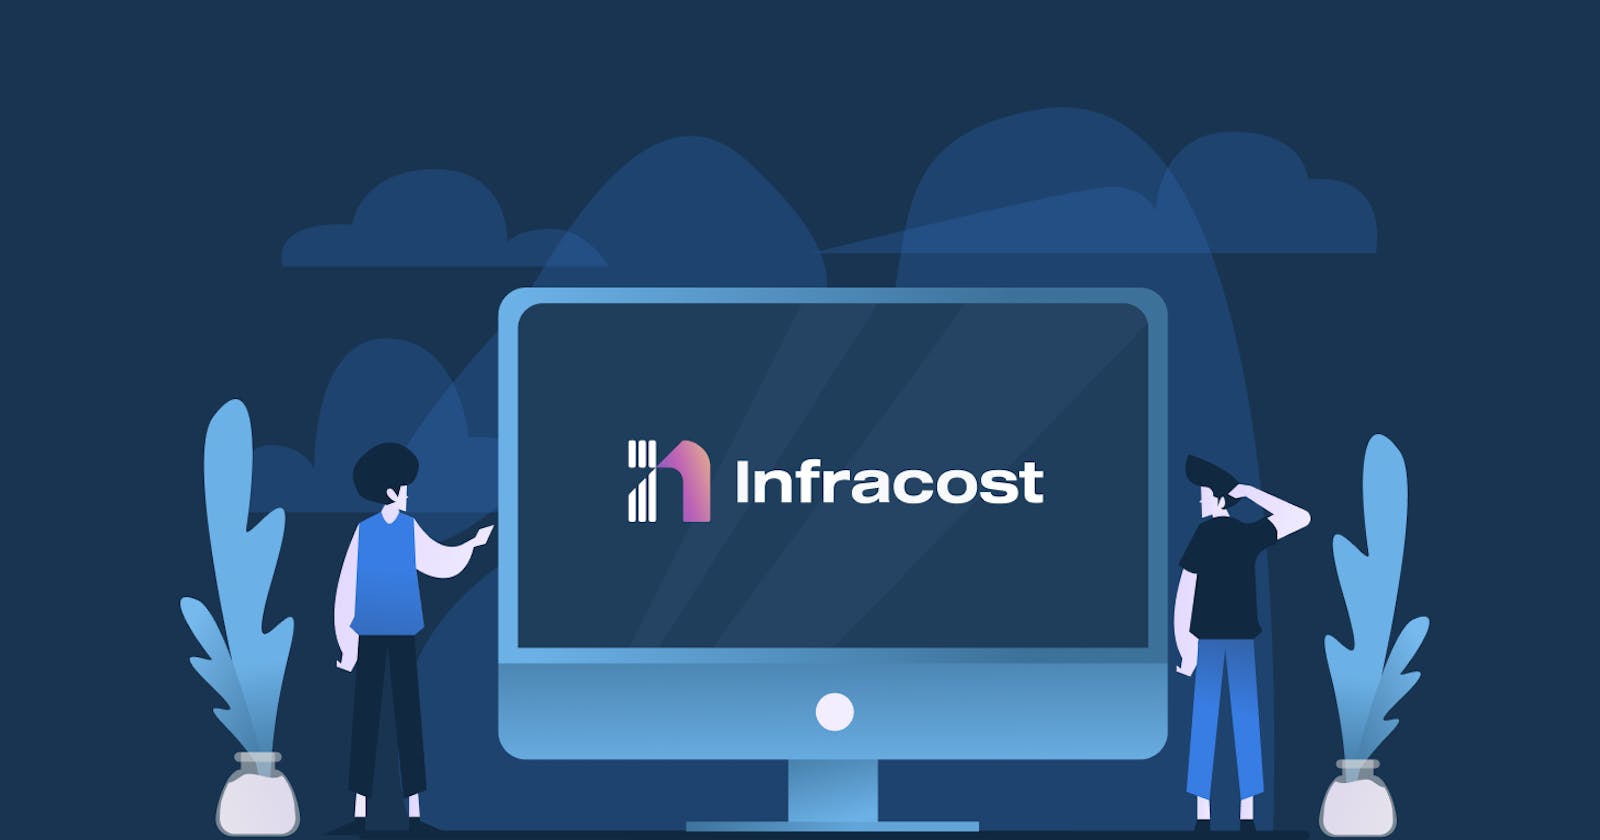 Infracost: How to Get Started